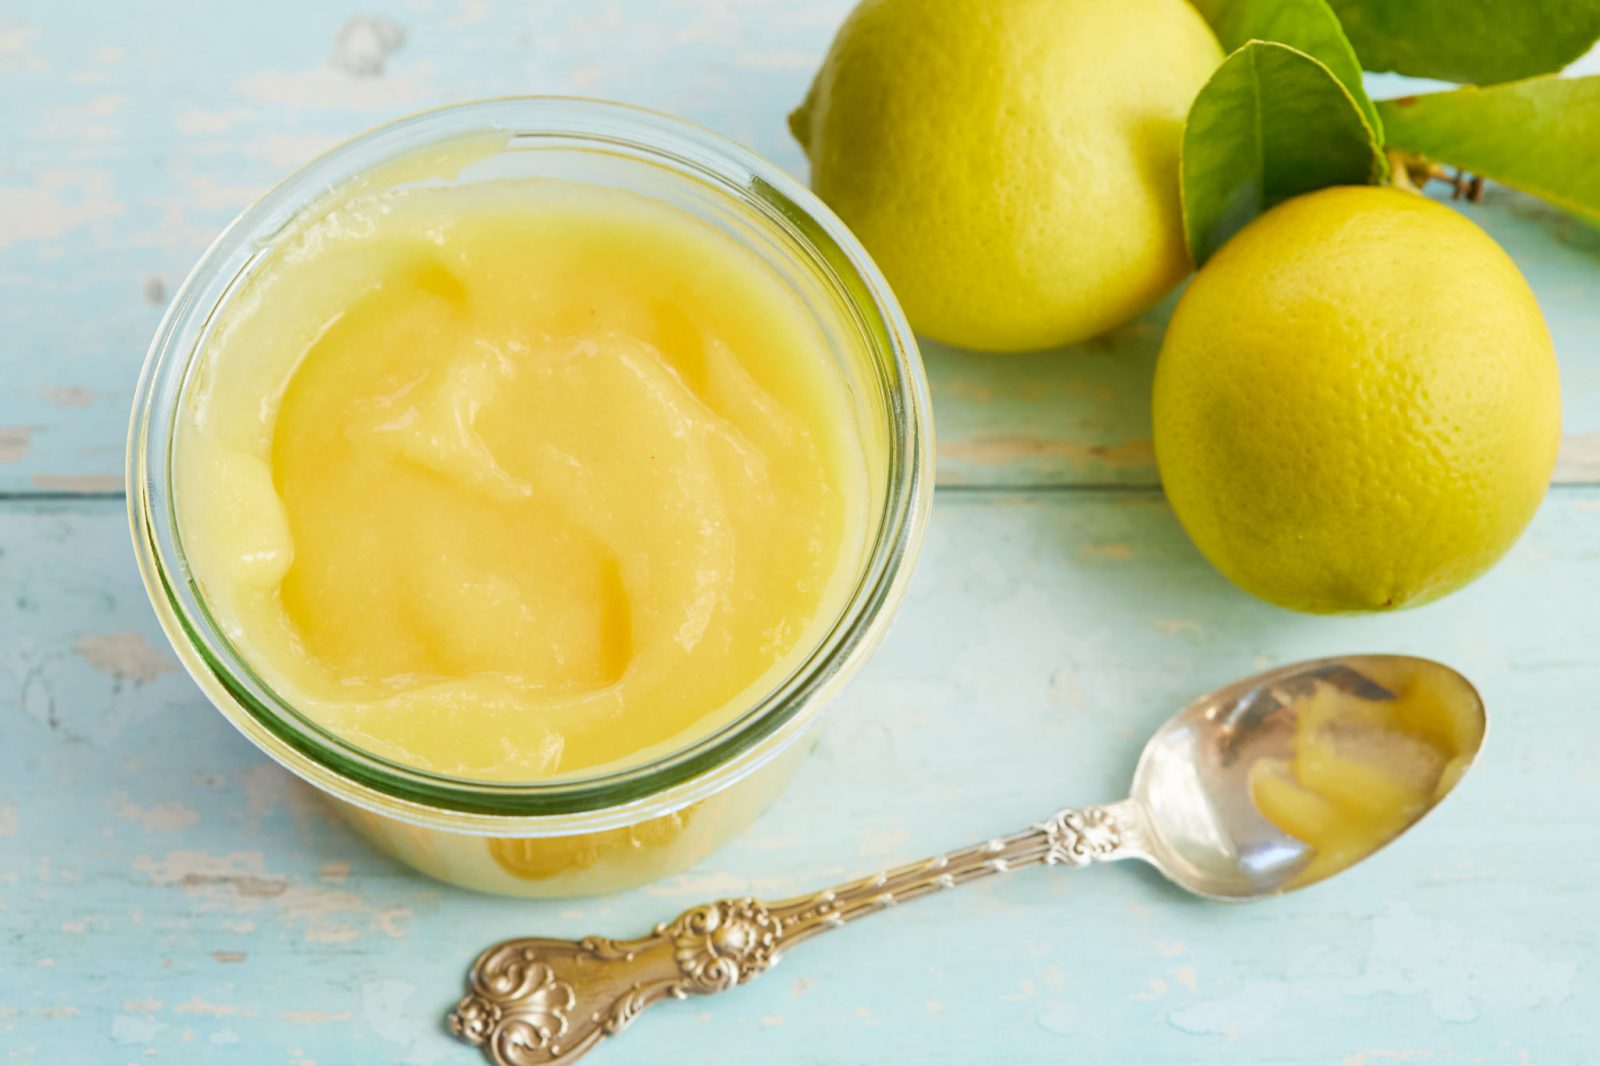 💡 If You Are a General Knowledge Know-It-All, You Shouldn’t Break a Sweat Answering 19 of These 25 Questions Correctly lemon curd